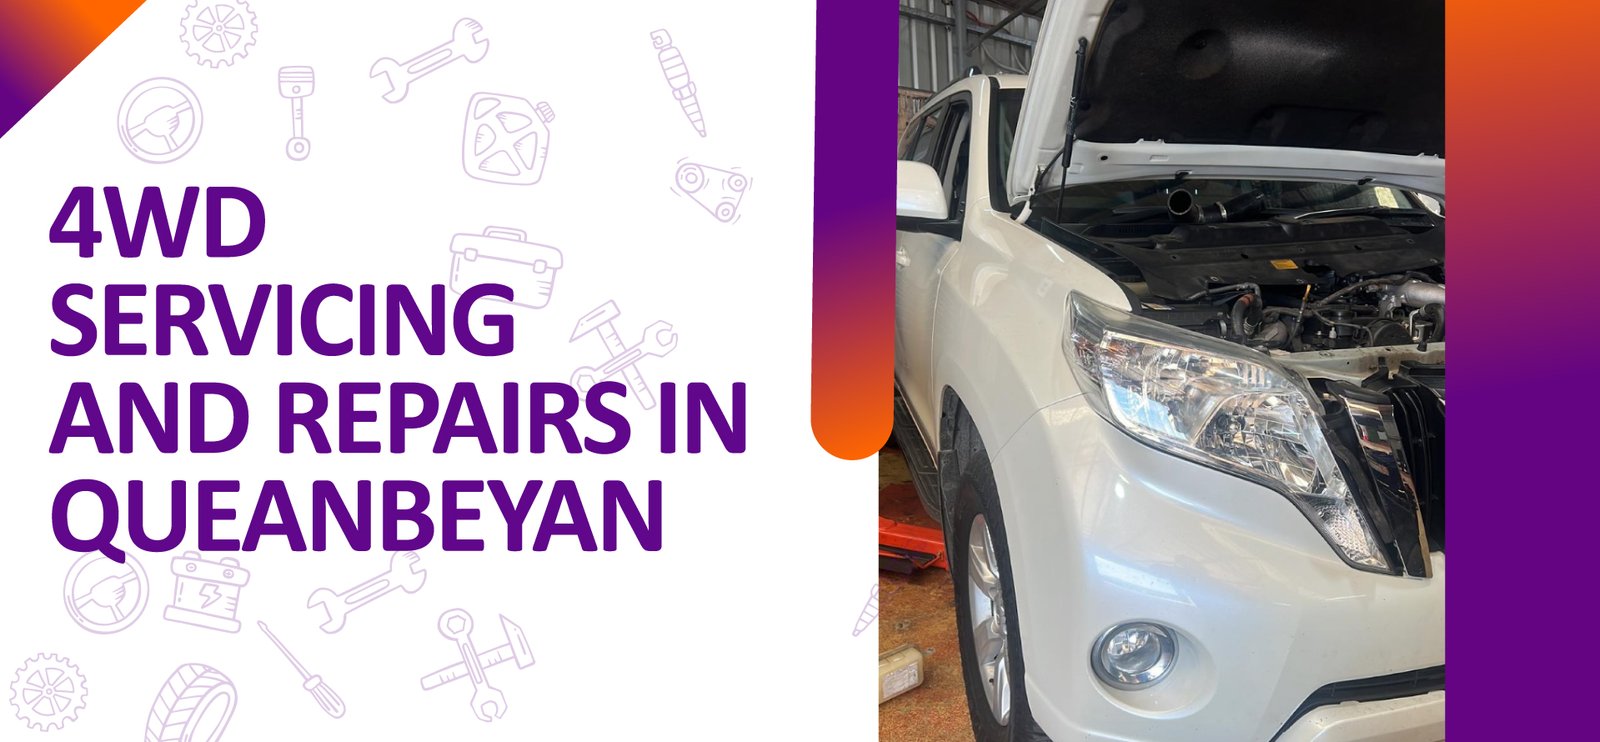 Queanbeyan 4WD Servicing and Repairs | Trusted Experts